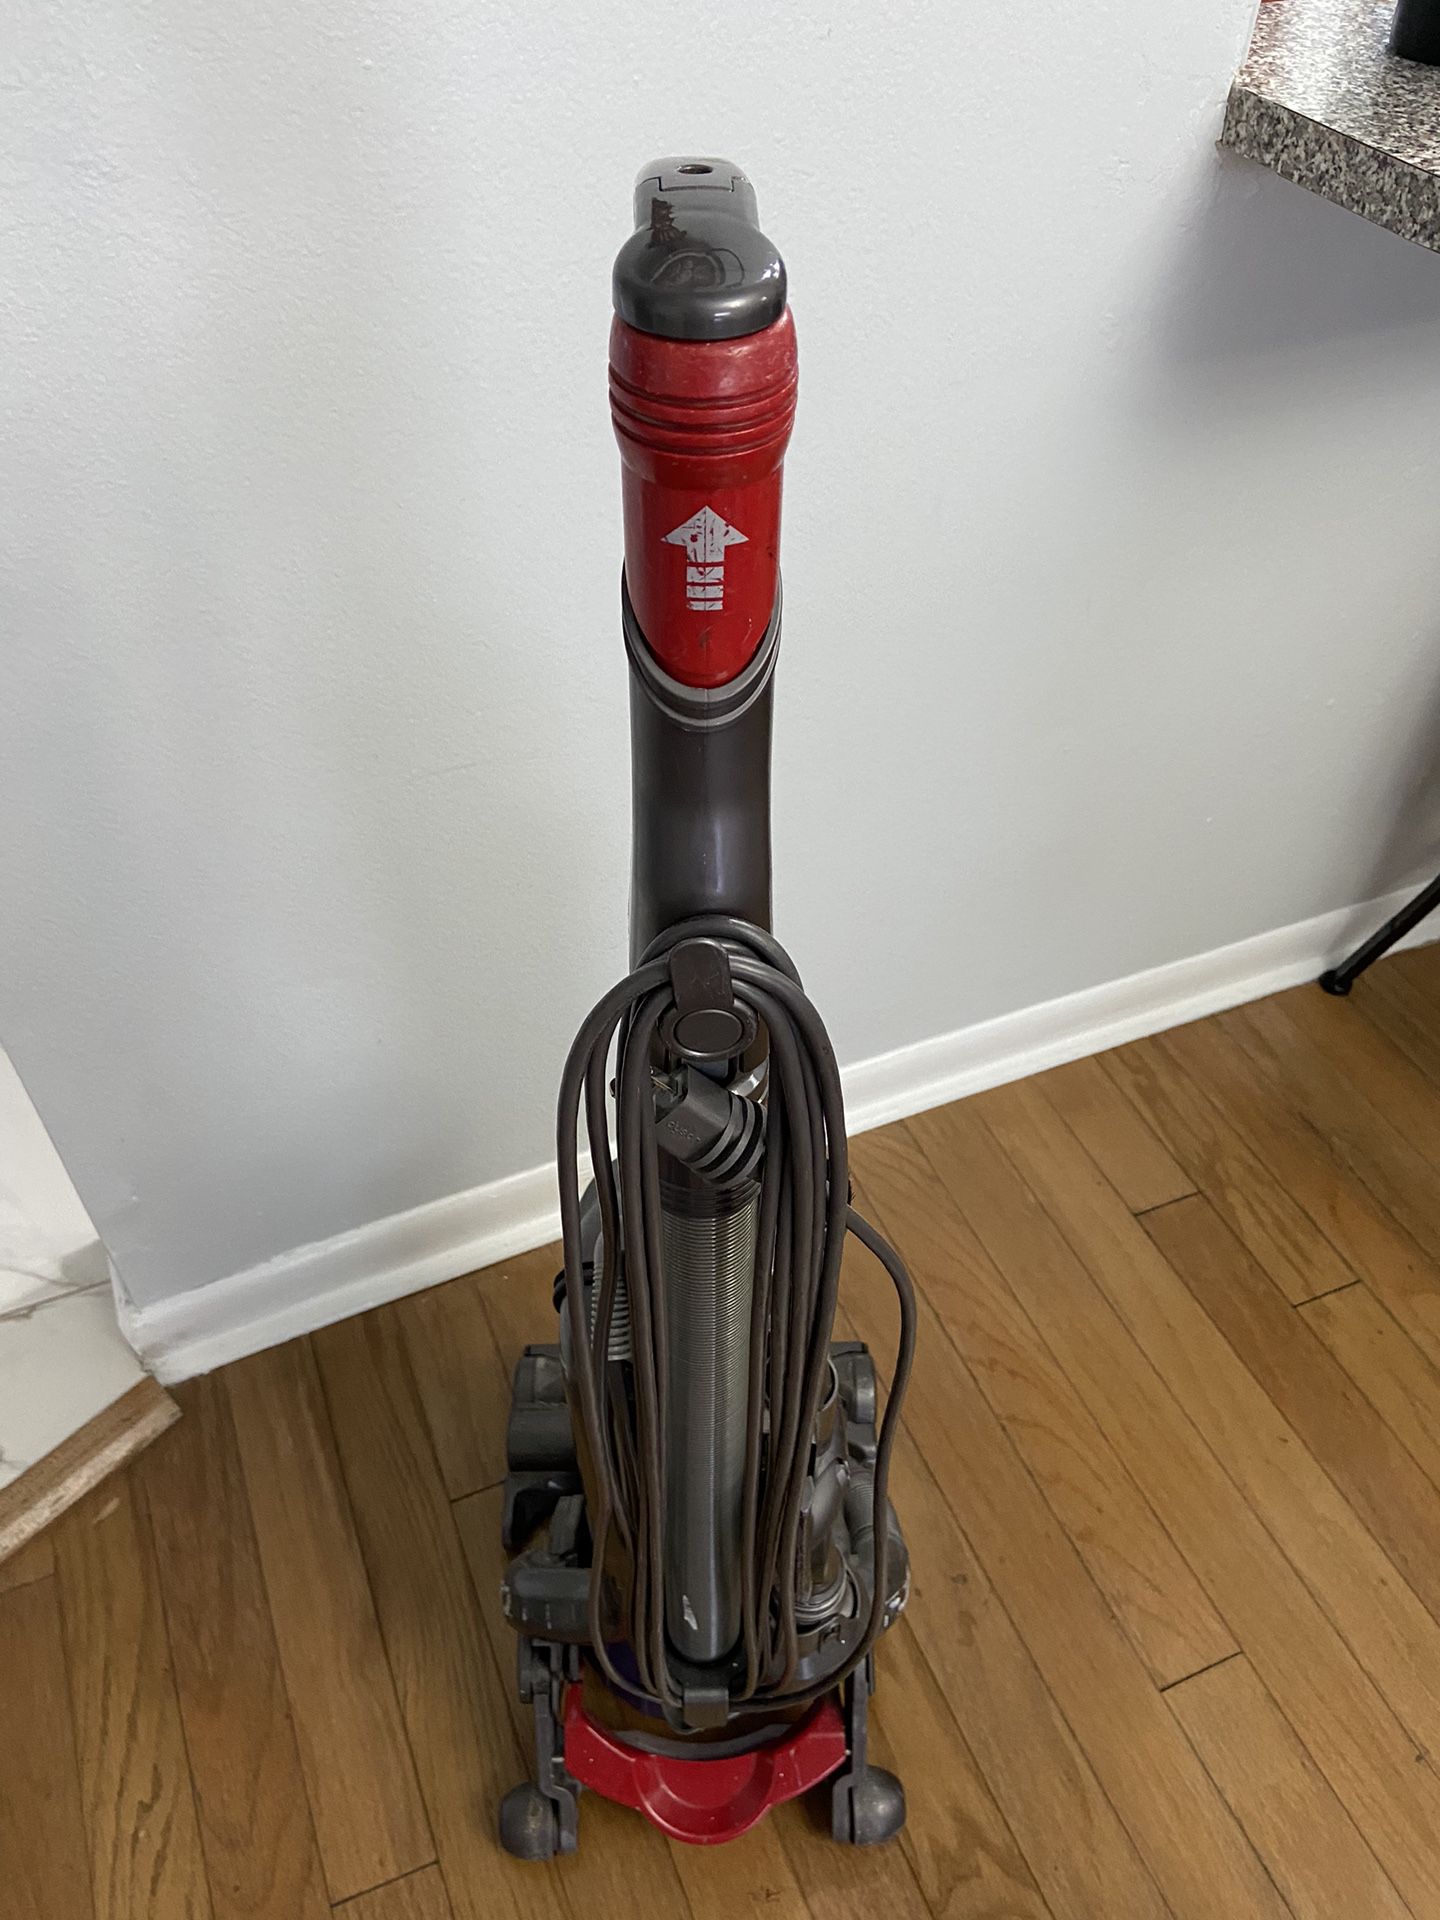 Dyson Ball DC 25 Animal design for homes with pets